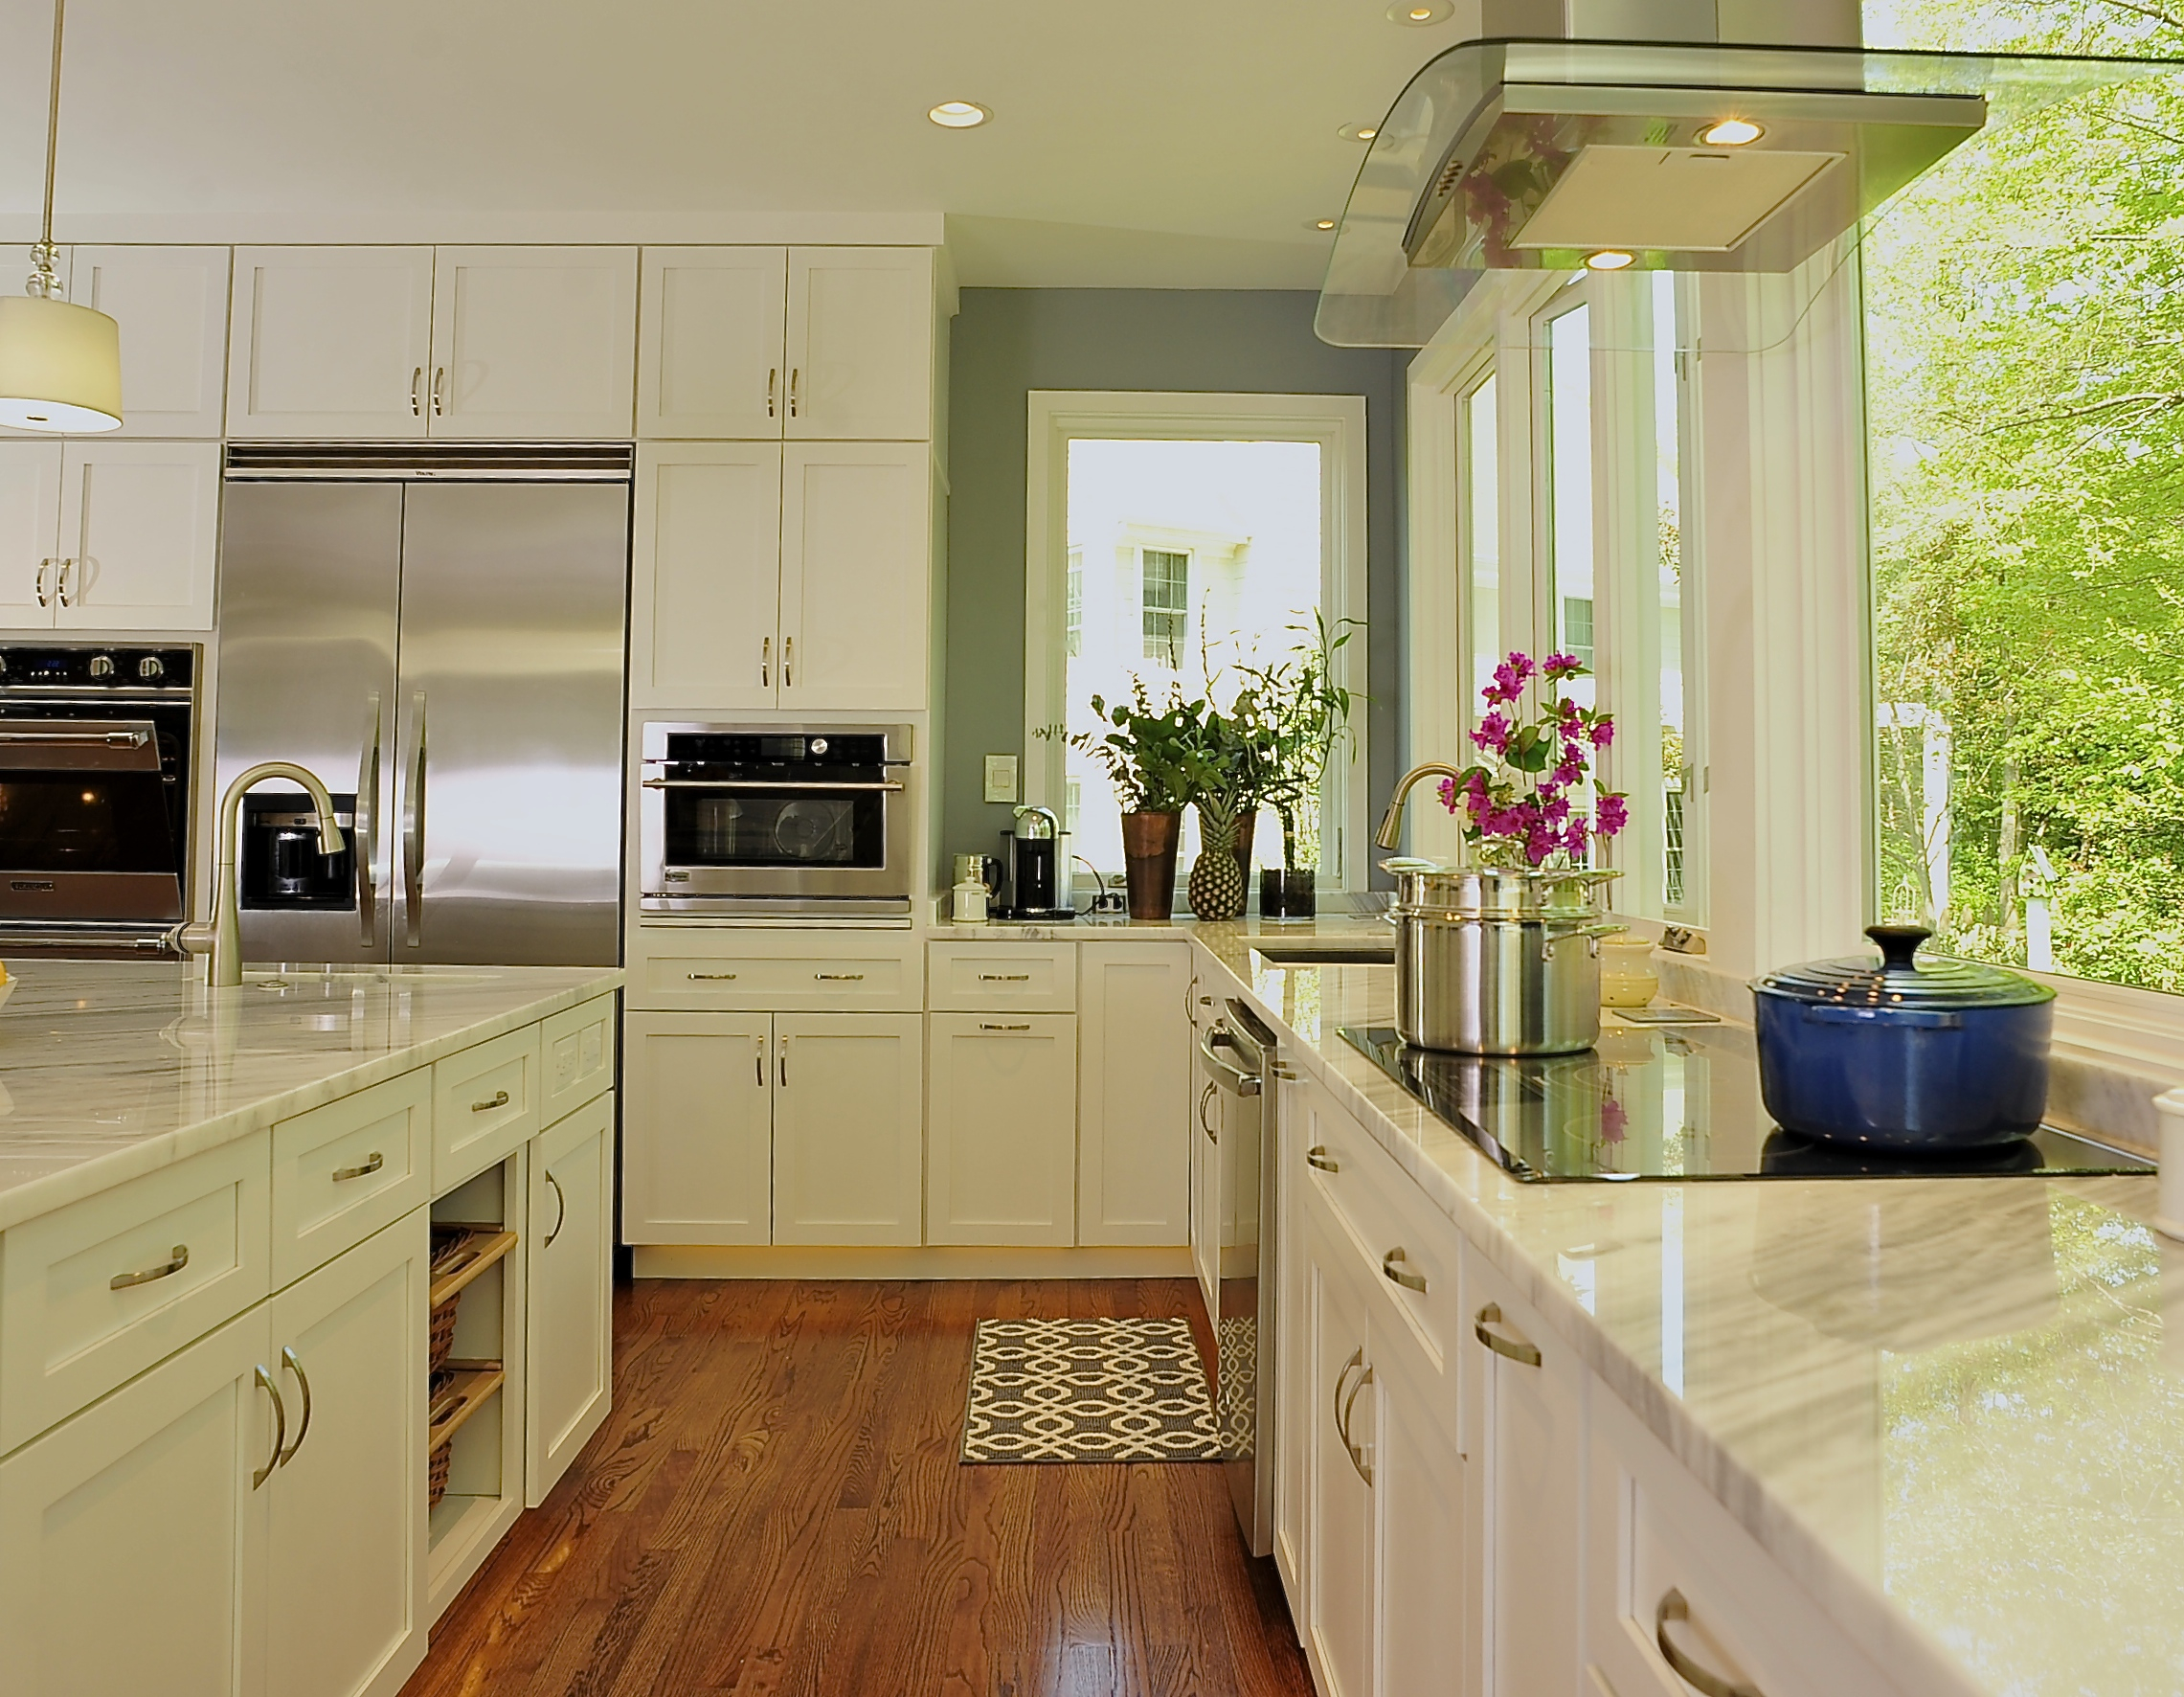 A clean kitchen is designed to be open with a well thought out work triangle and plenty of cabinet storage.